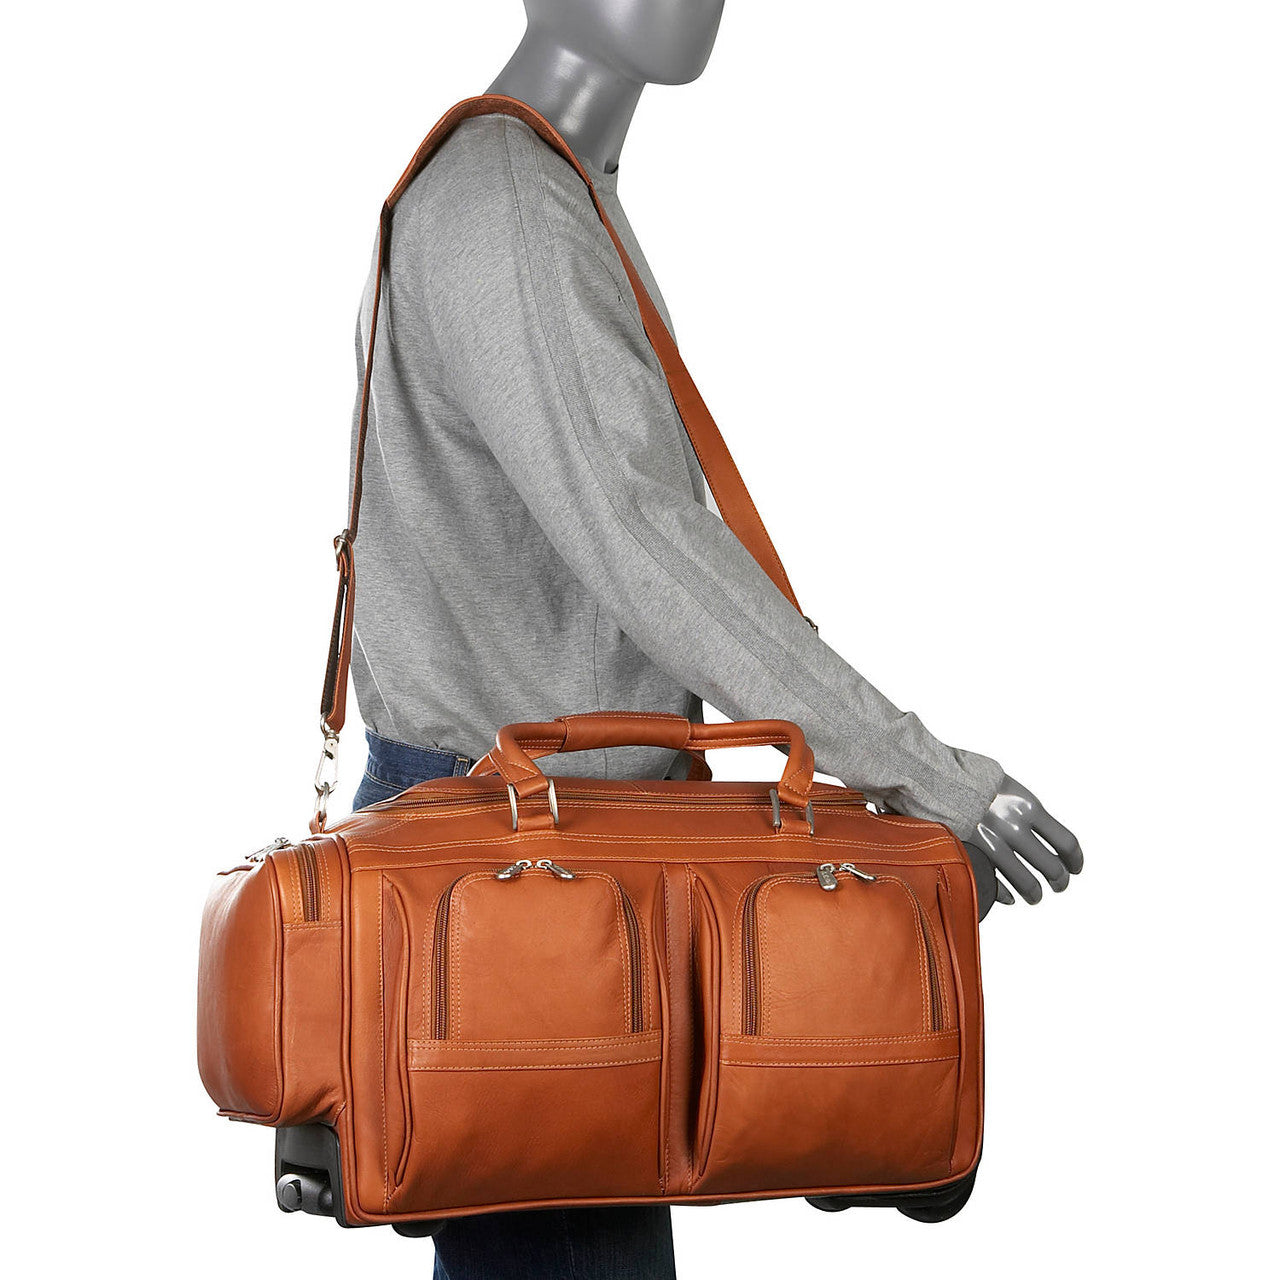 Duffel with Pockets on Wheels - Leather Loom